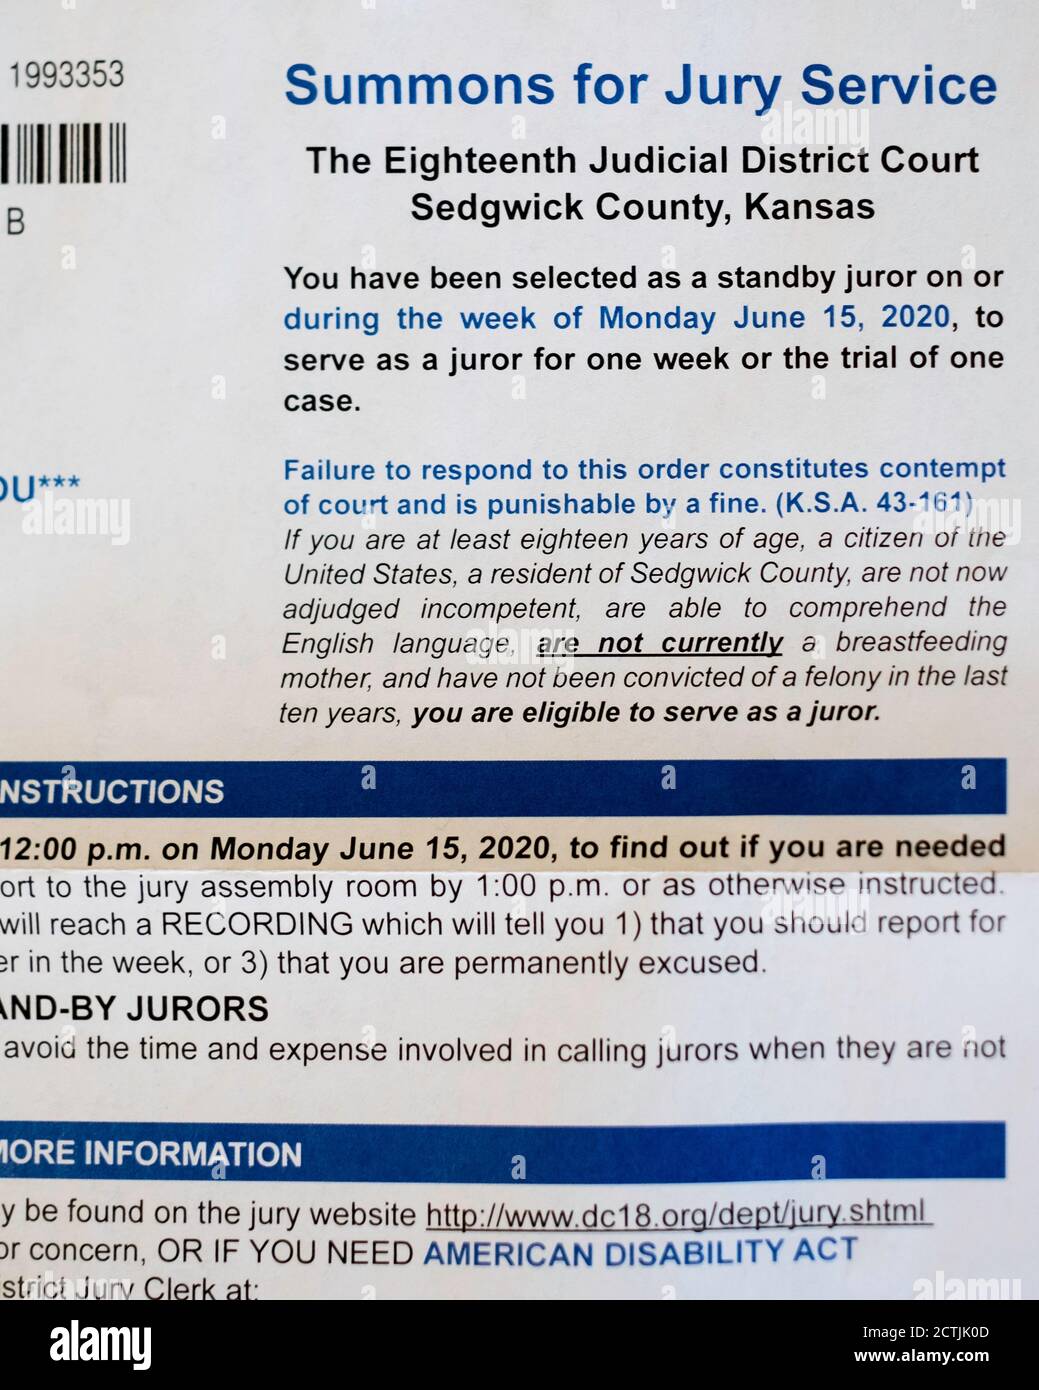 Official letter of Summons for Jury Service from Sedgwick County, Kansas, USA. Stock Photo